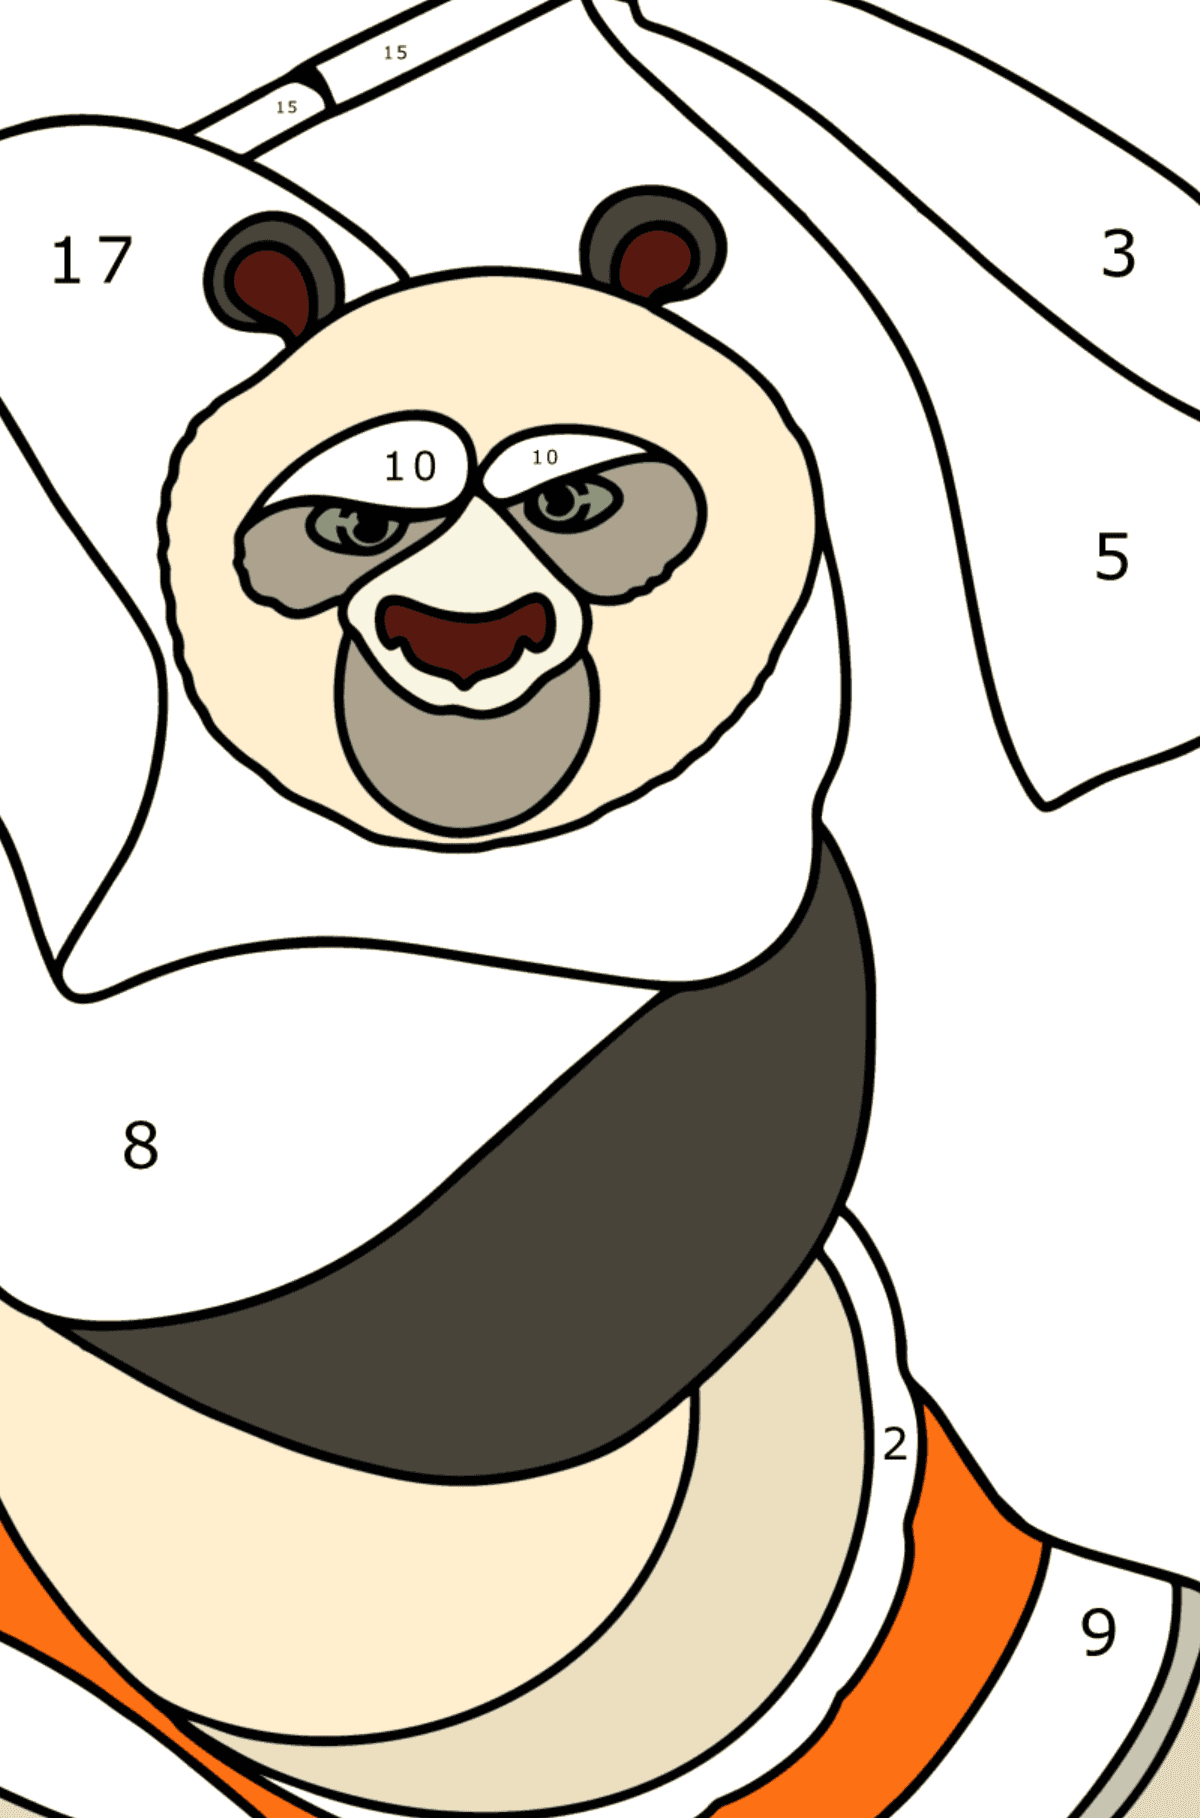 Kung Fu Panda coloring page - Coloring by Numbers for Kids